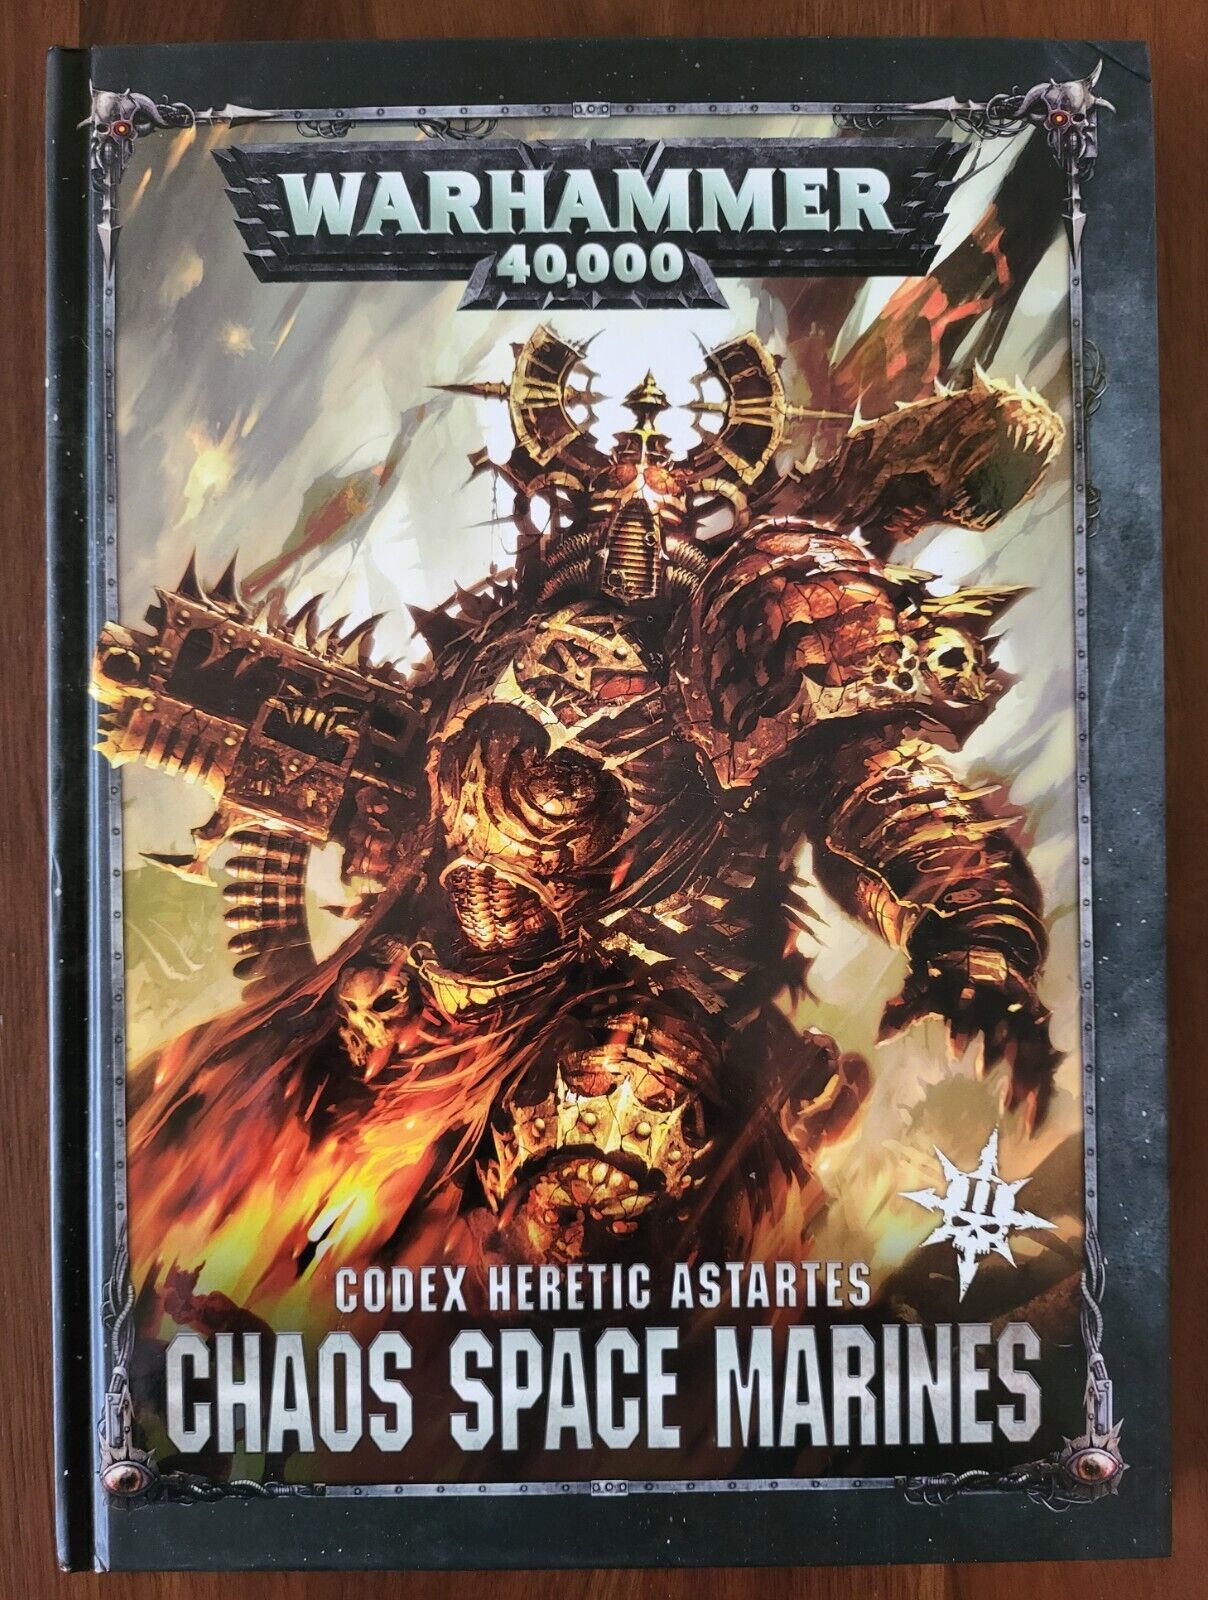 Primary image for Warhammer 40K Codex Heretic Astartes: Chaos Space Marines (Hardcover, 2019)